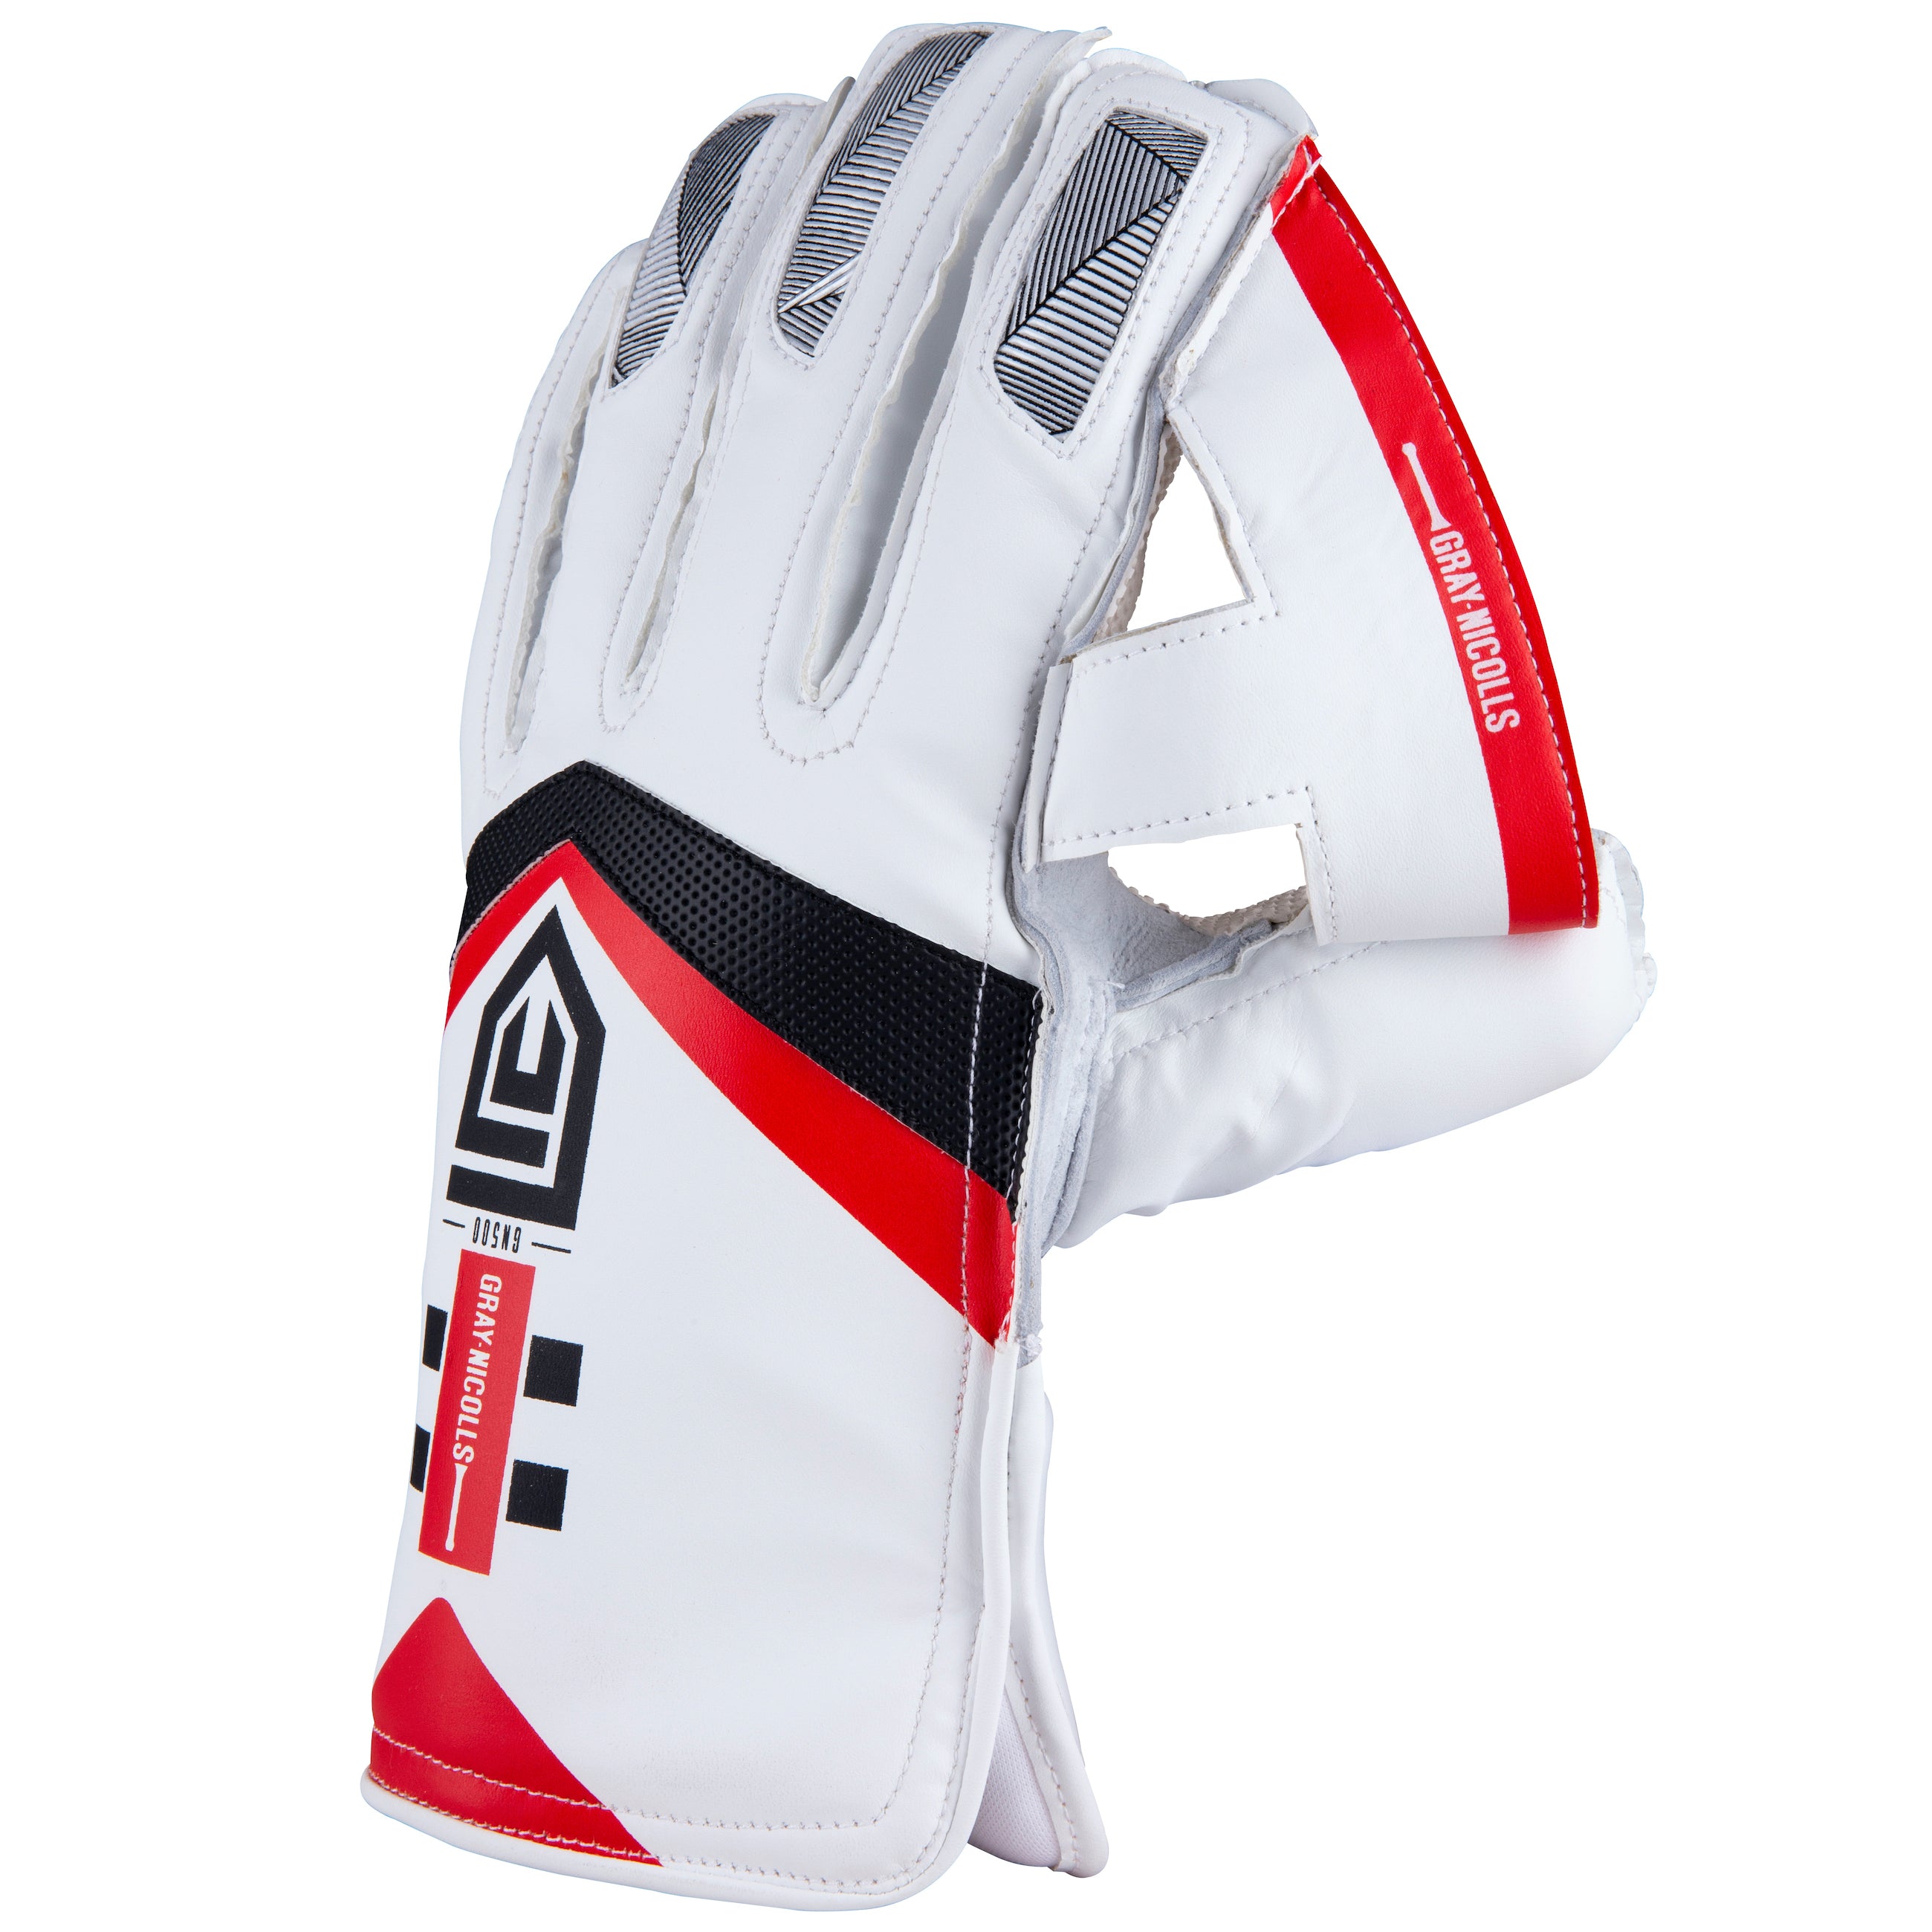 GN500 Wicketkeeping Glove